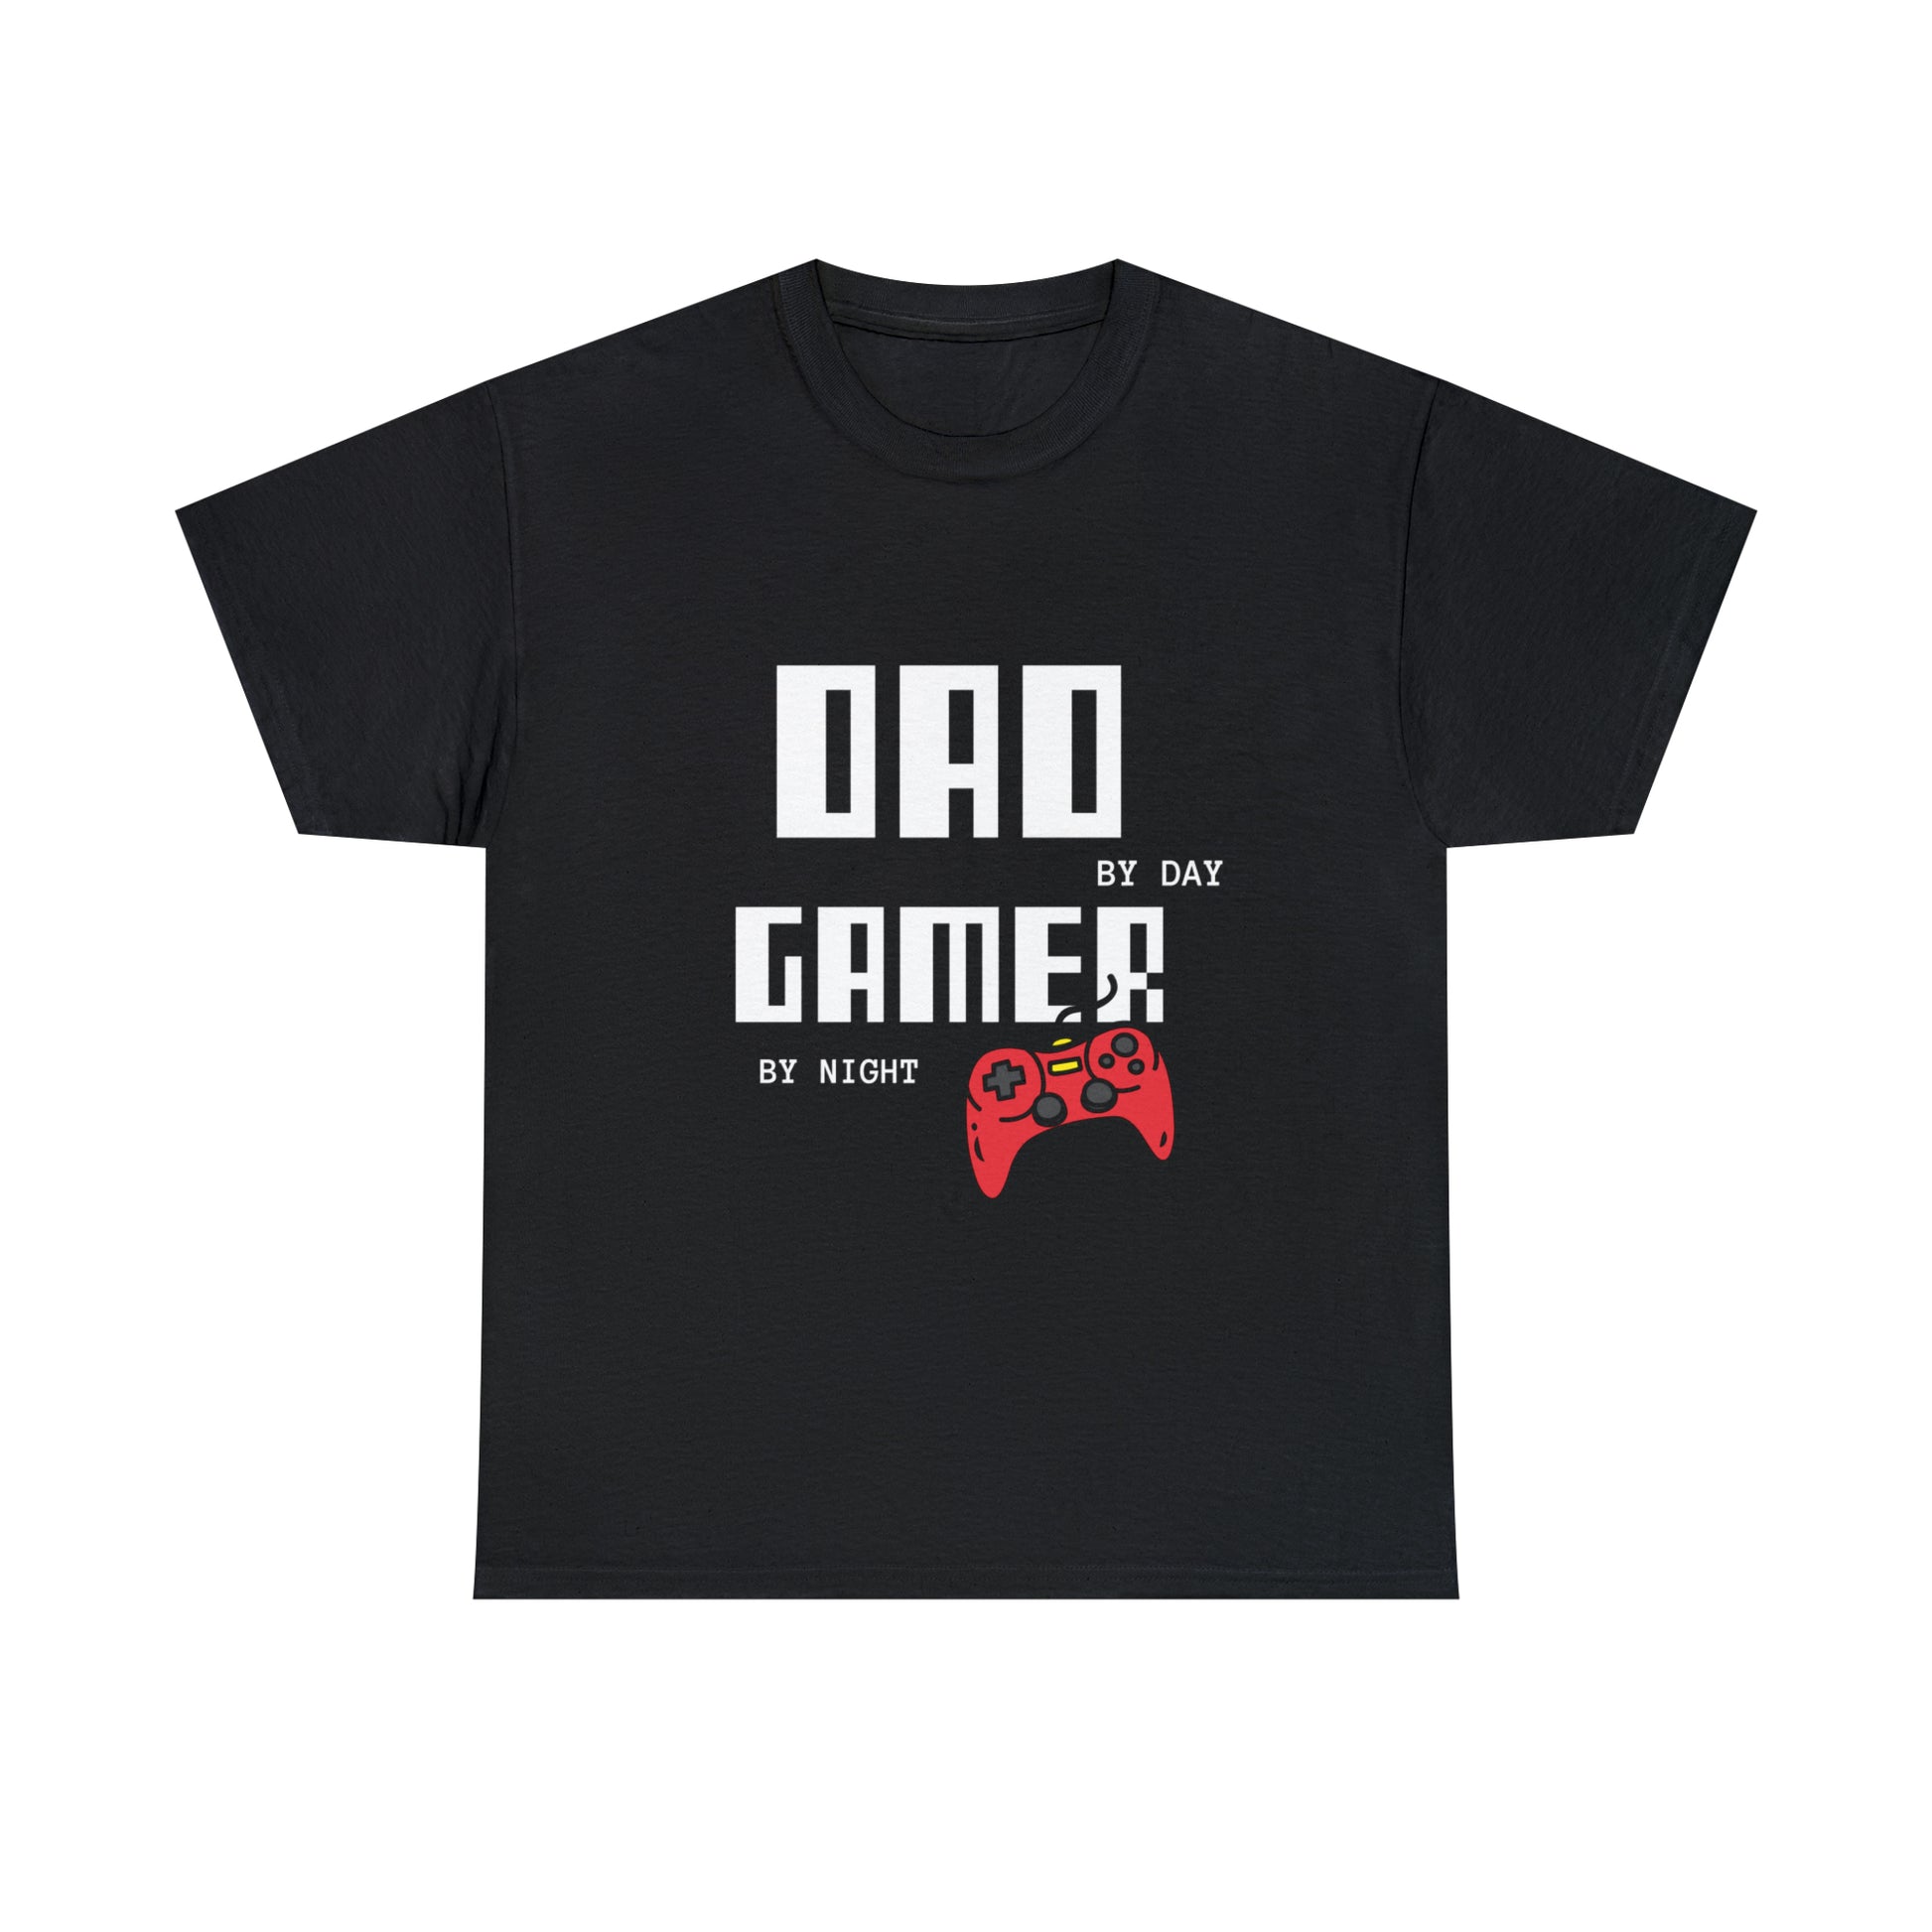 Father's Day gift for gamers